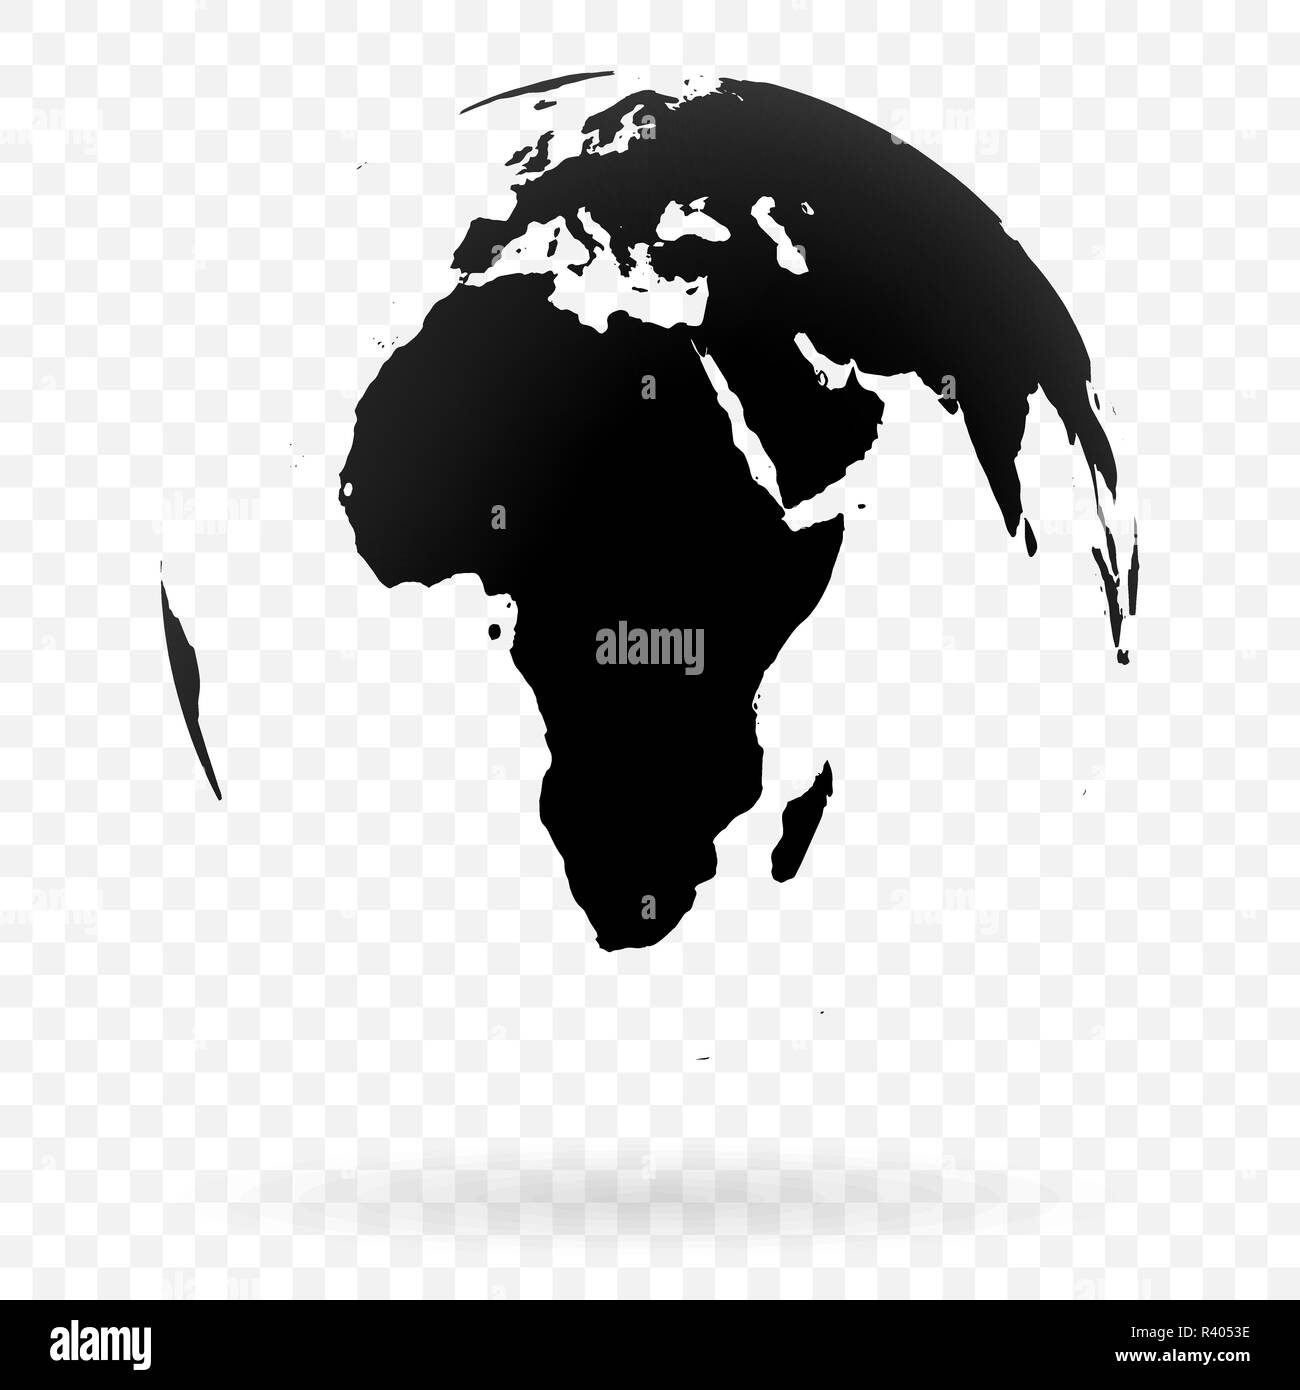 Highly detailed Earth globe symbol, Africa and Middle East. Black on white background. Stock Vector